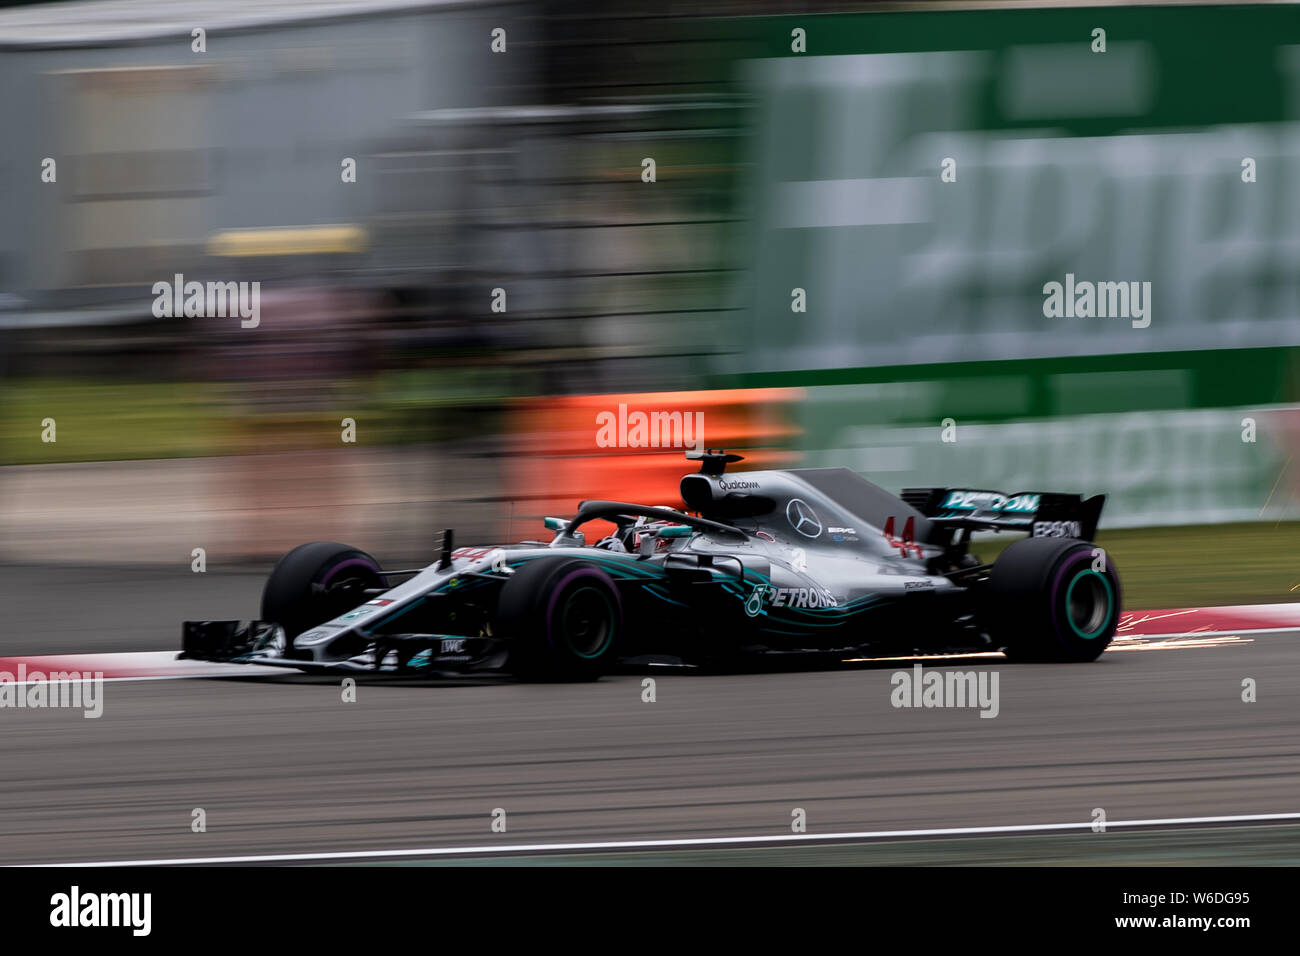 British F1 driver Lewis Hamilton of Mercedes steers his car during the qualifying session for the 2018 Formula One Chinese Grand Prix at the Shanghai Stock Photo